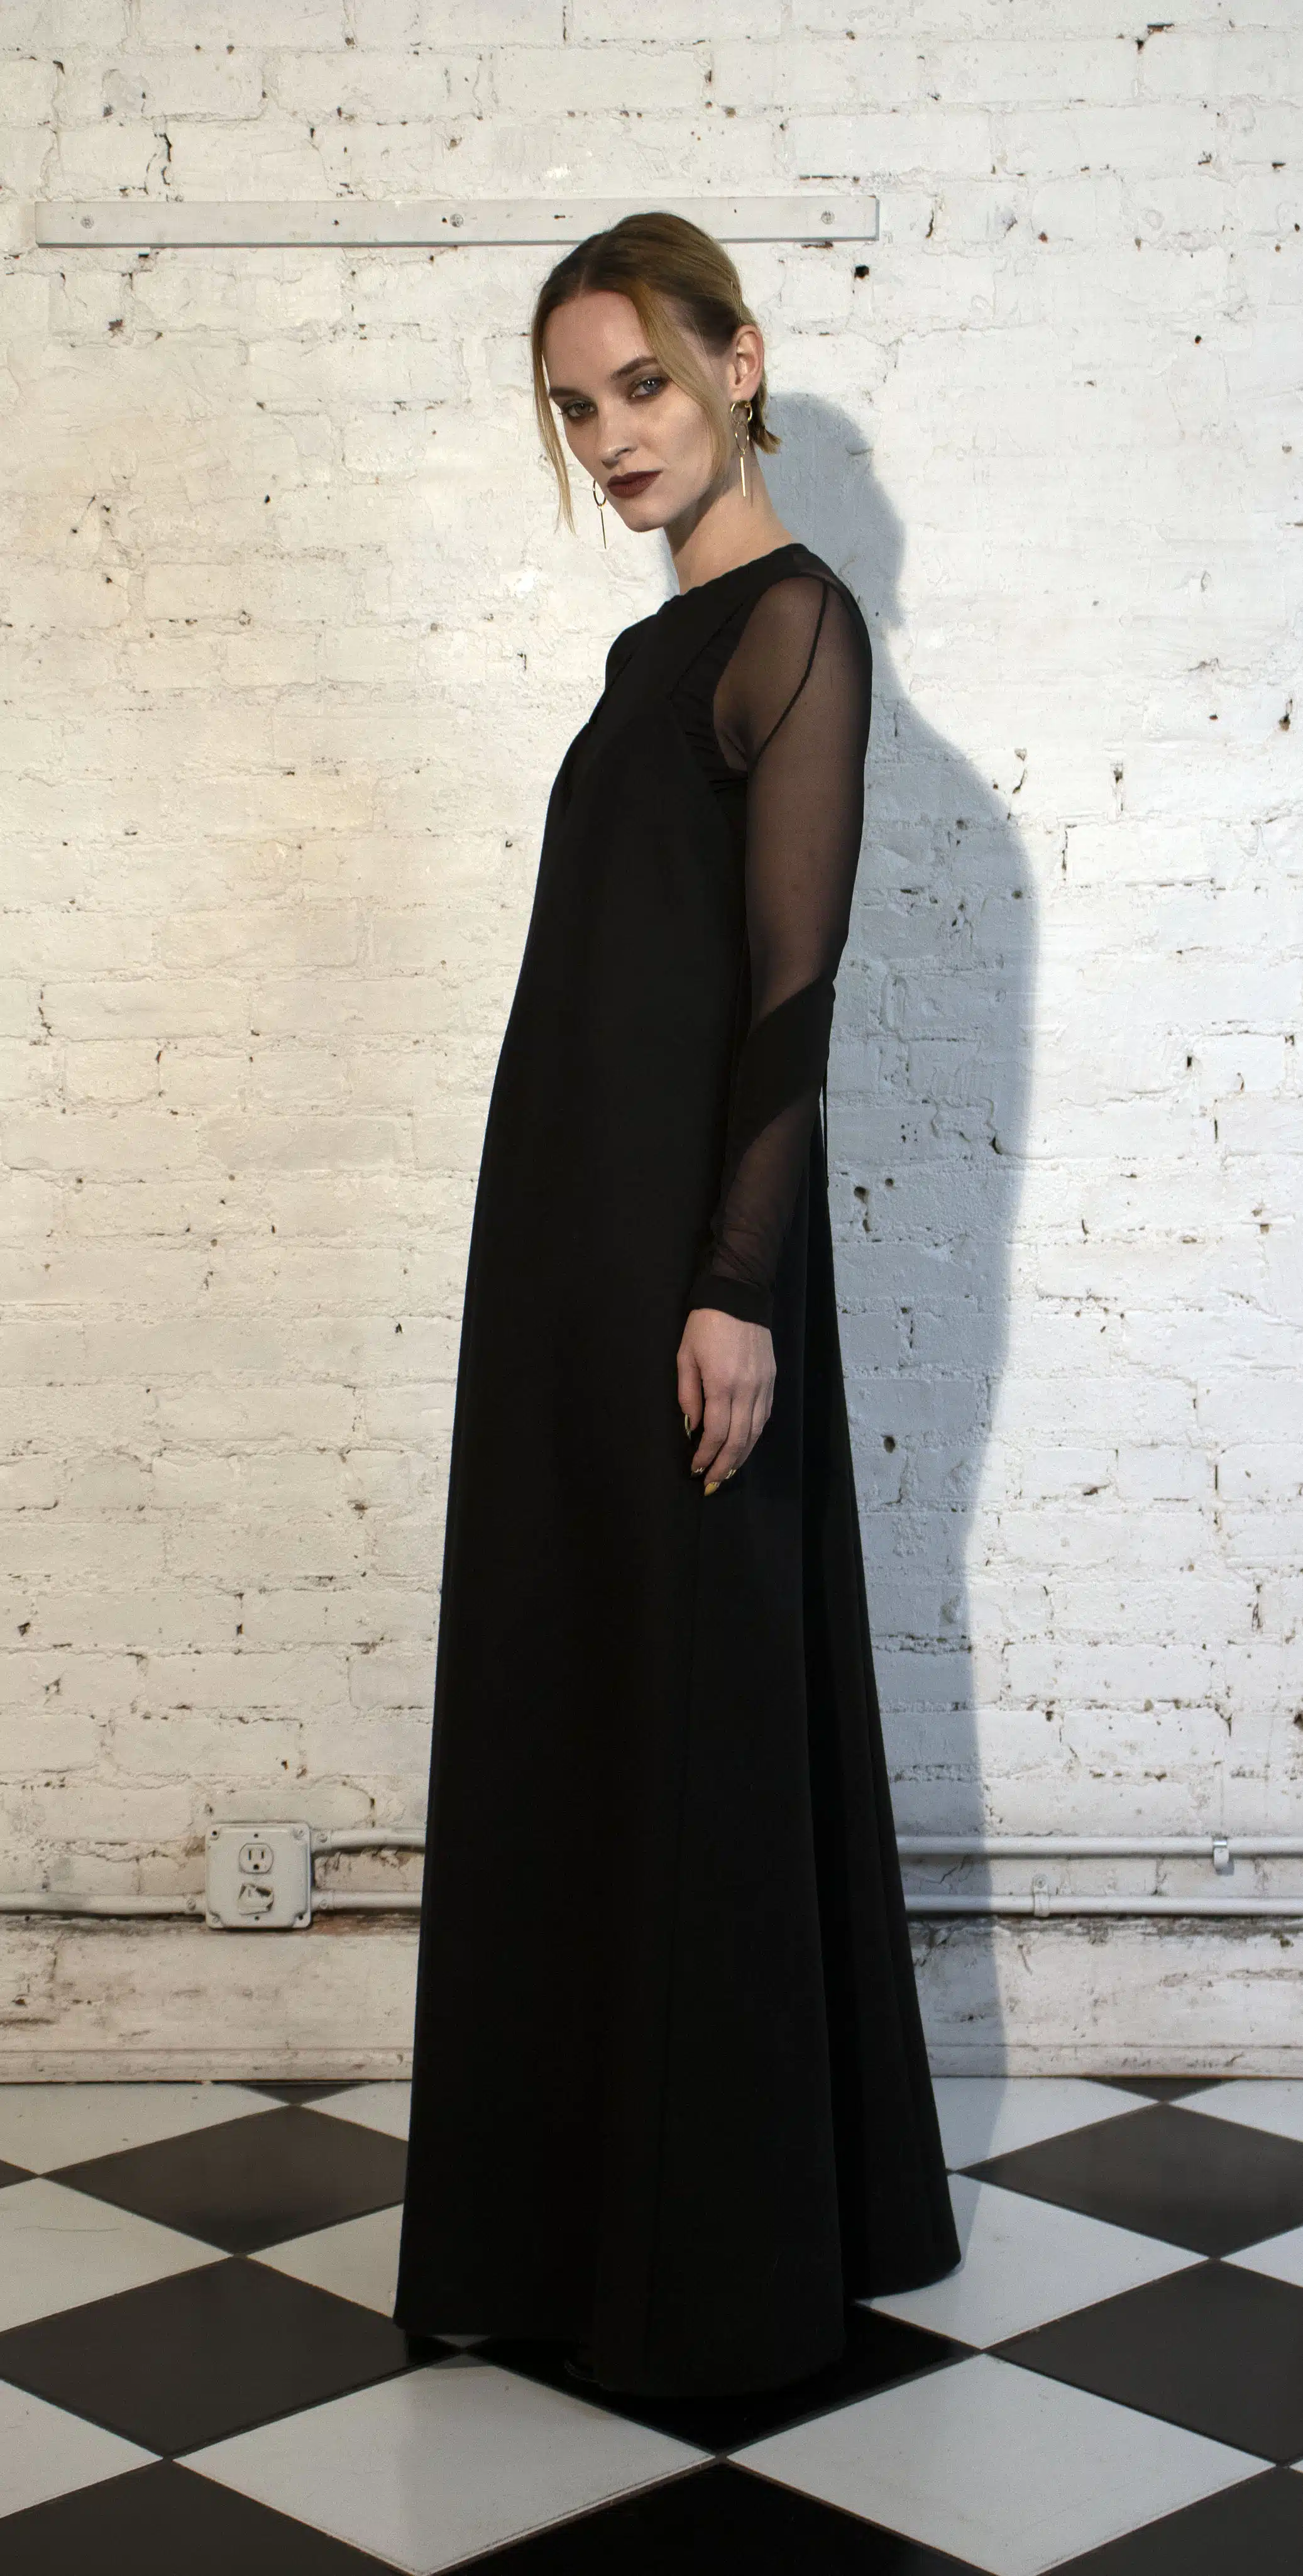 Image from FW19 Collection